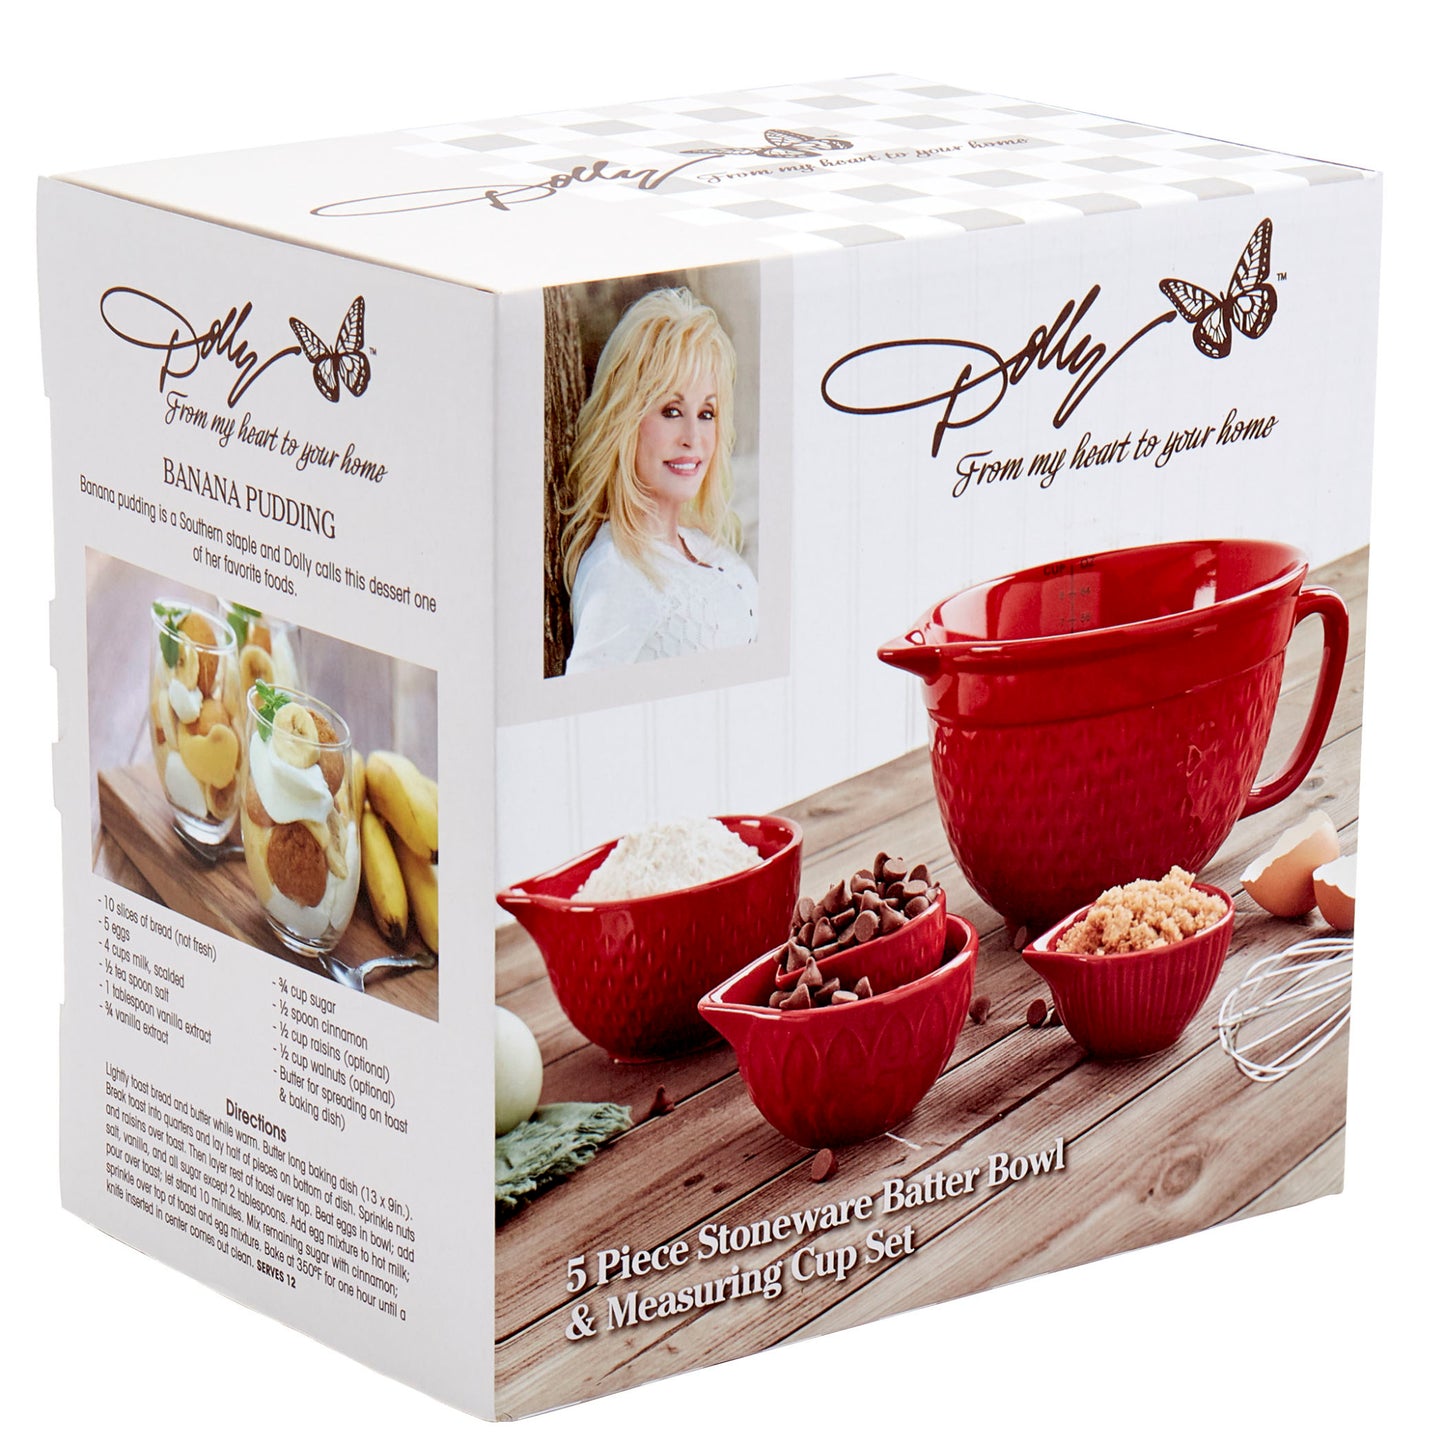 Dolly 5pc. Stoneware Batter Bowl & Measuring Cup Set